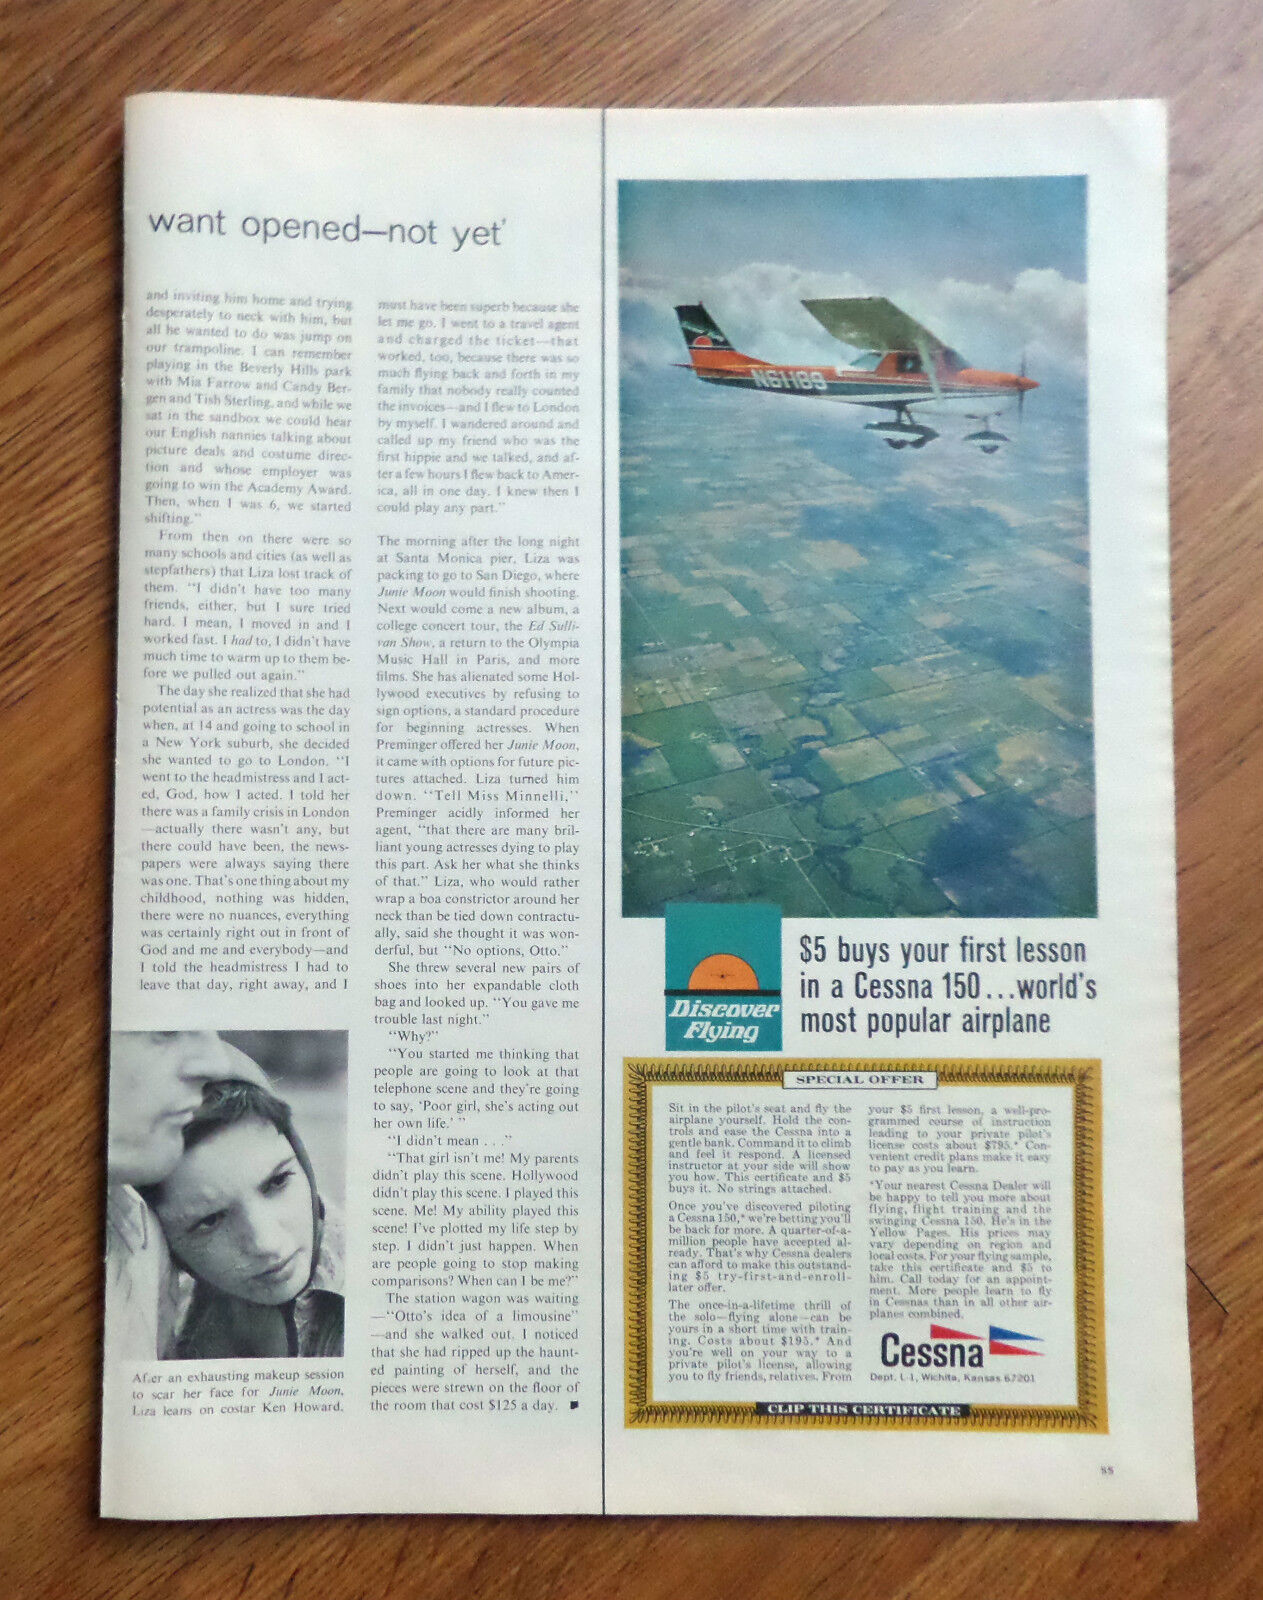 1969 Cessna 150 Airplane Ad $5 Buys your First Lesson in a Cessna 150